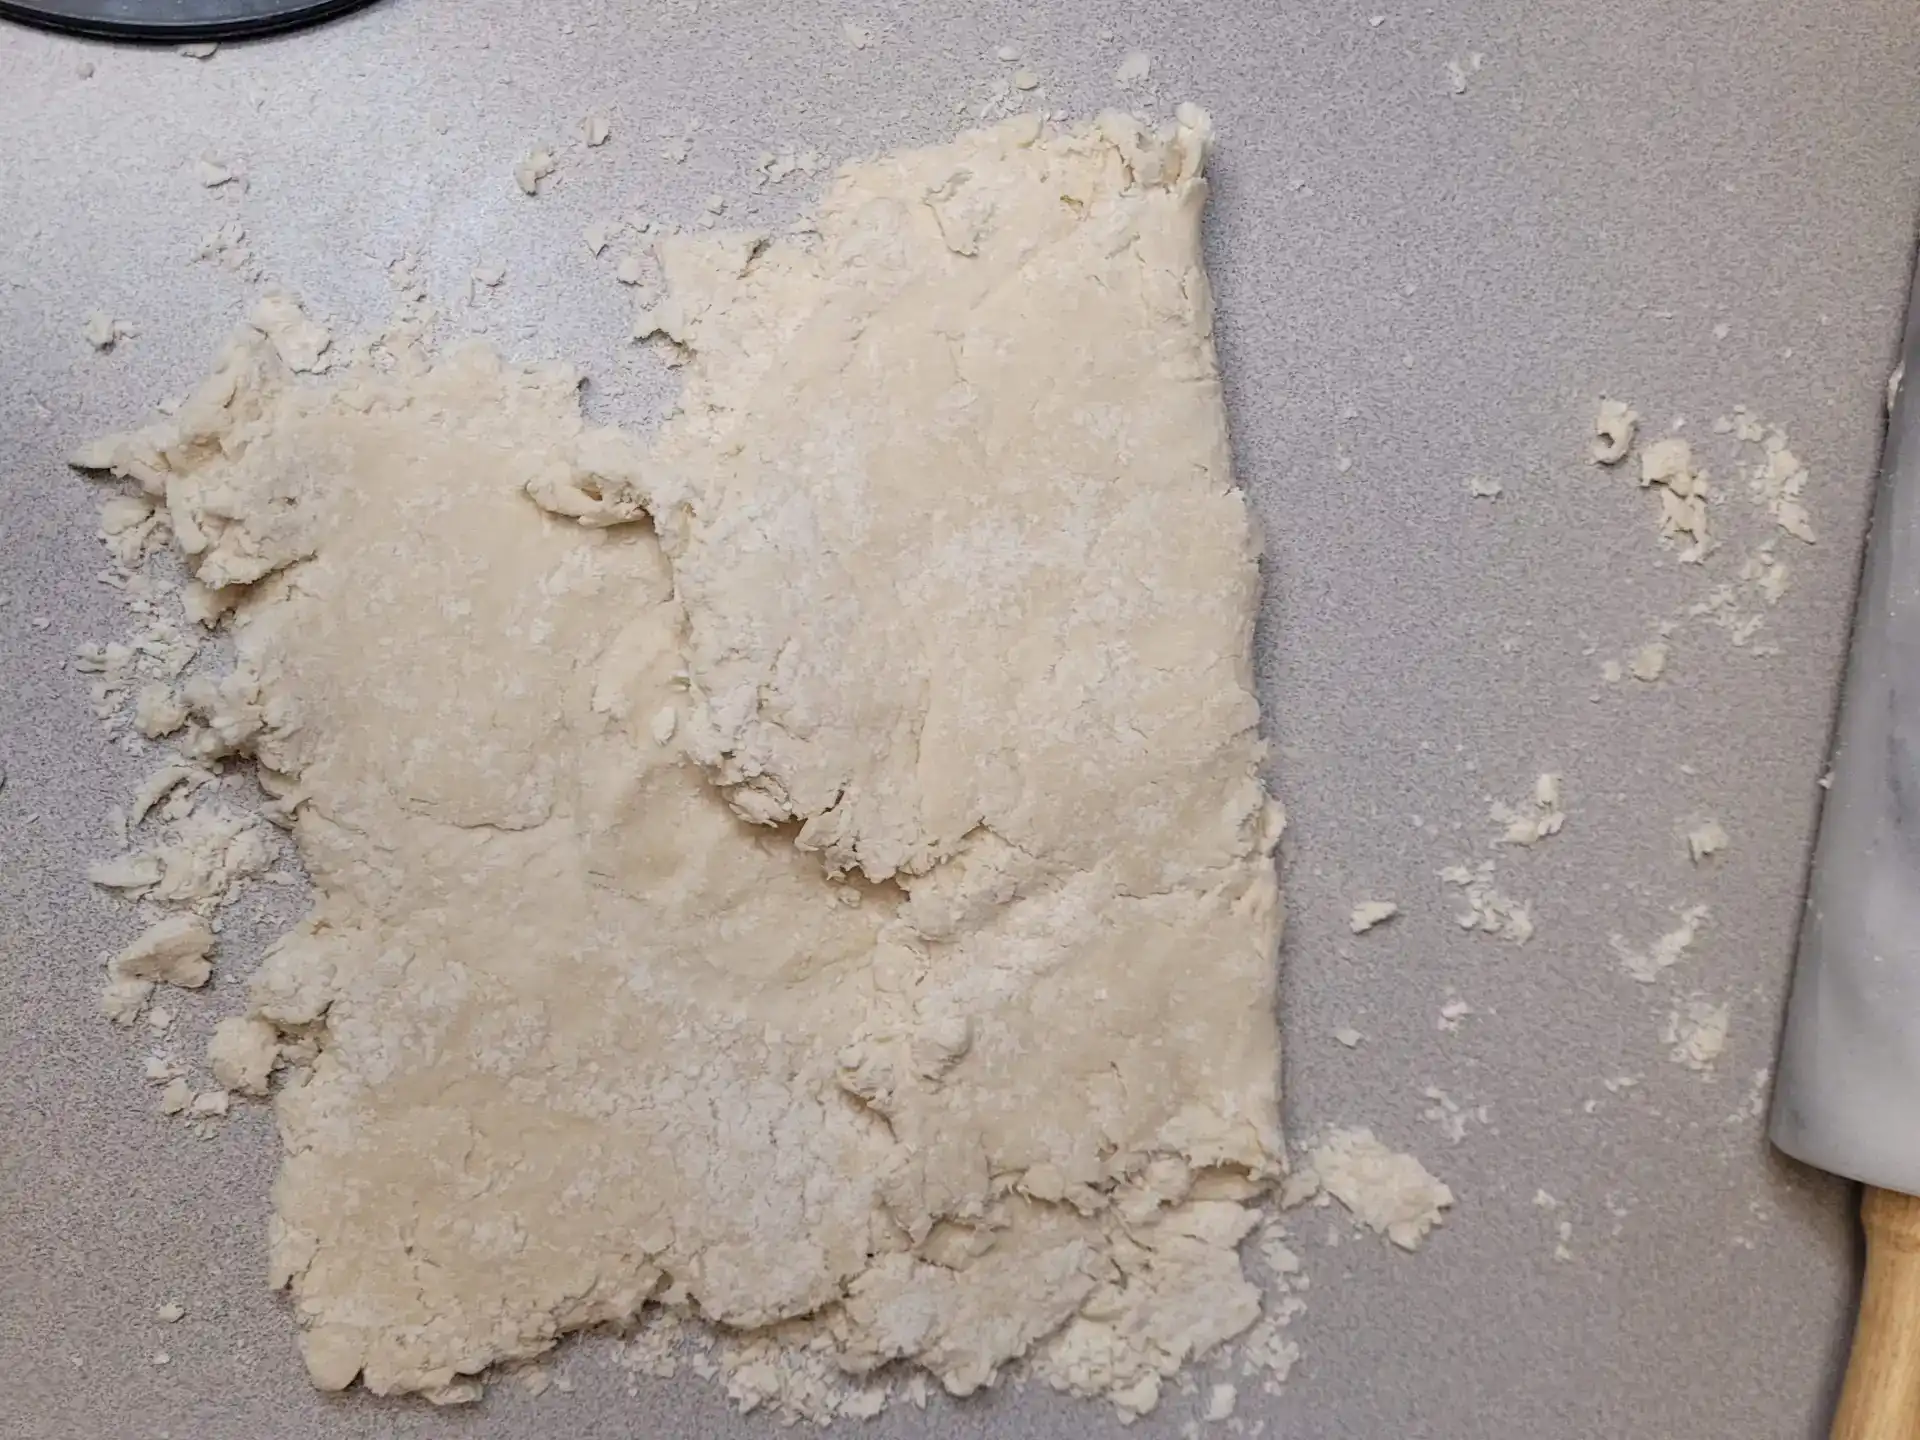 trifolding dough to create layers.